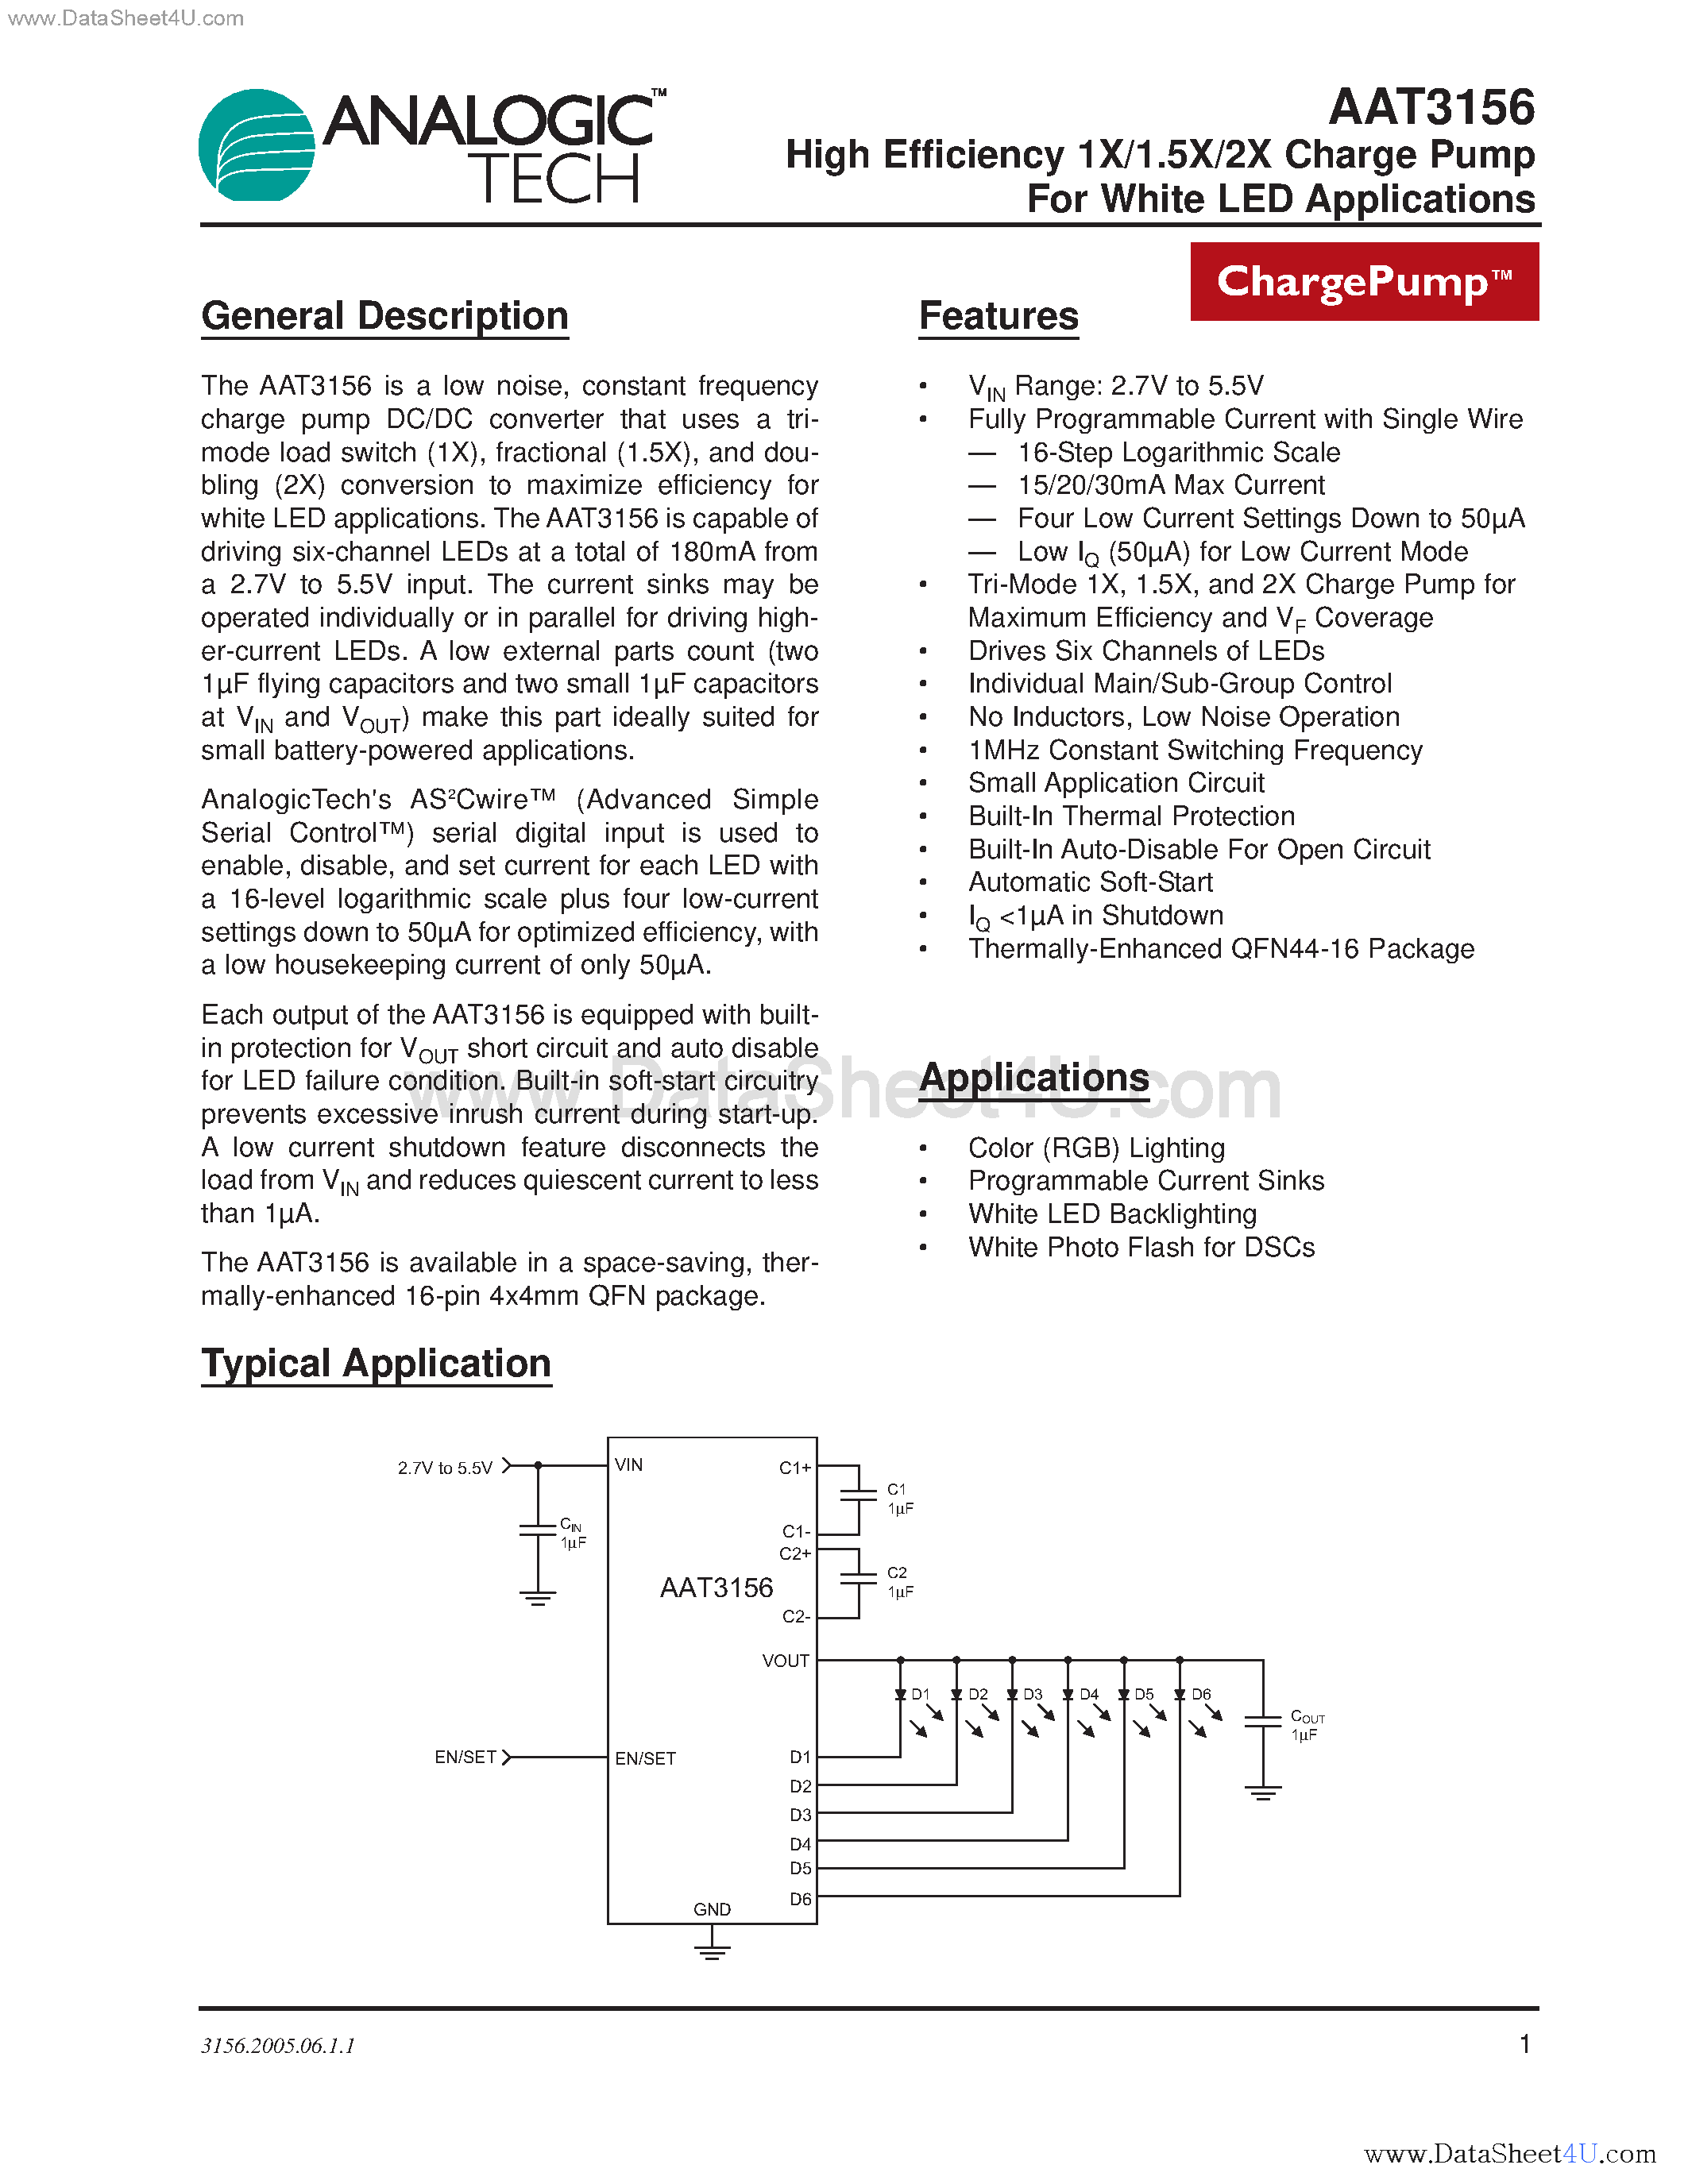 Datasheet AAT3156 - High Efficiency 1X/1.5X/2X Charge Pump For White LED Applications page 1